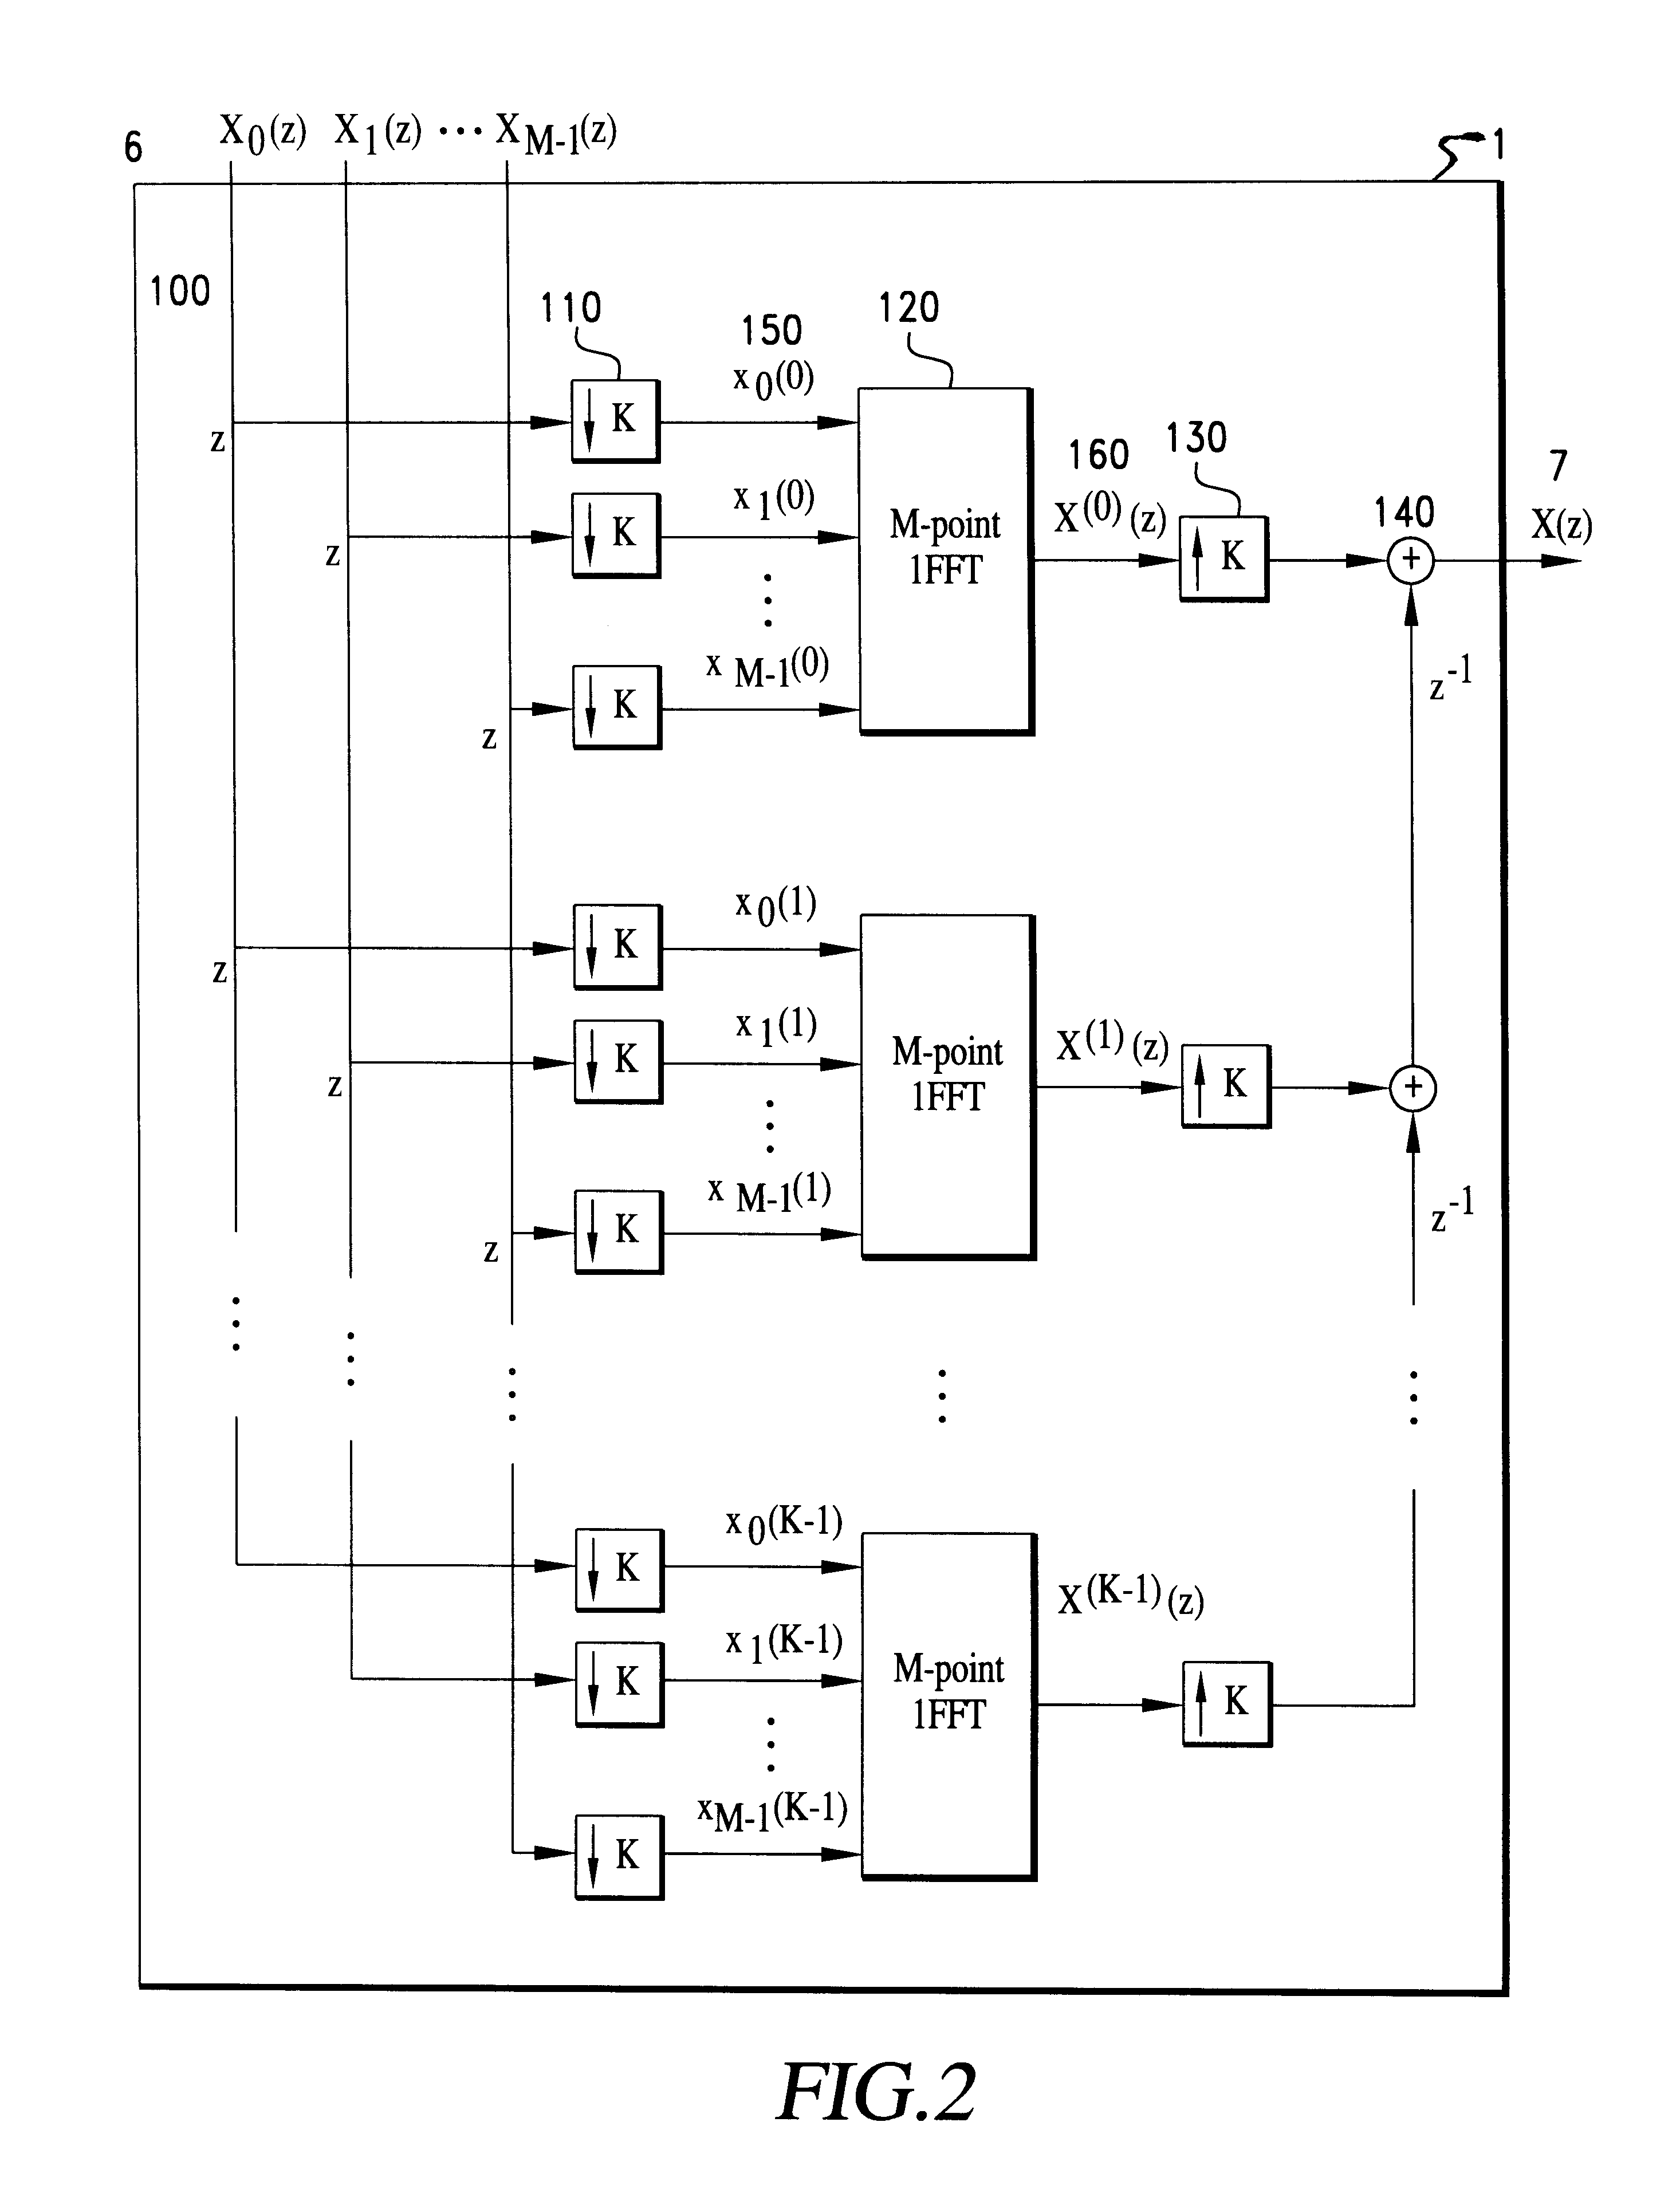 Residue division multiplexing system and apparatus for discrete-time signals